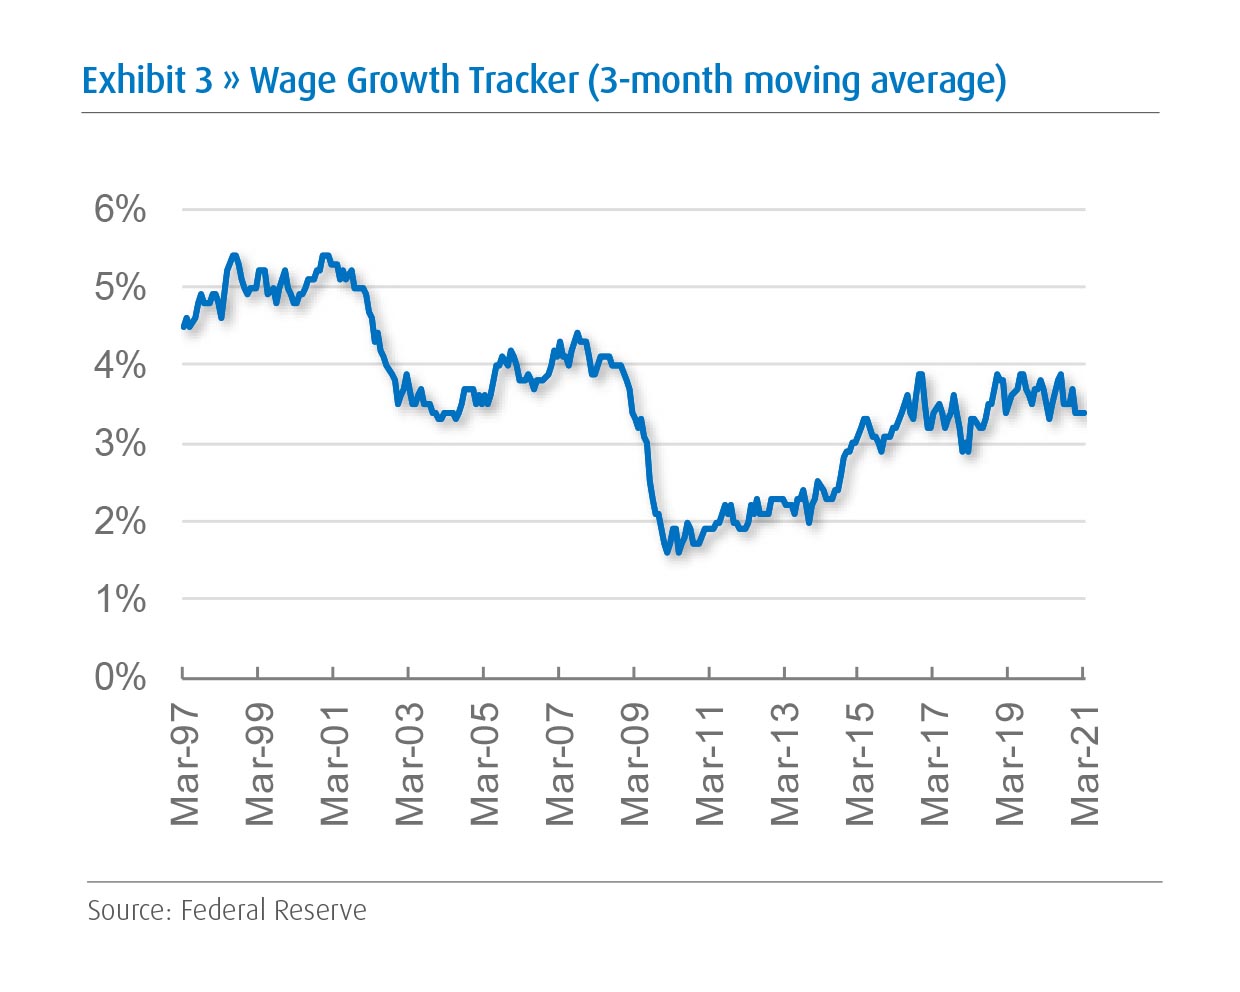 Wage Growth Tracker (3-month moving average)